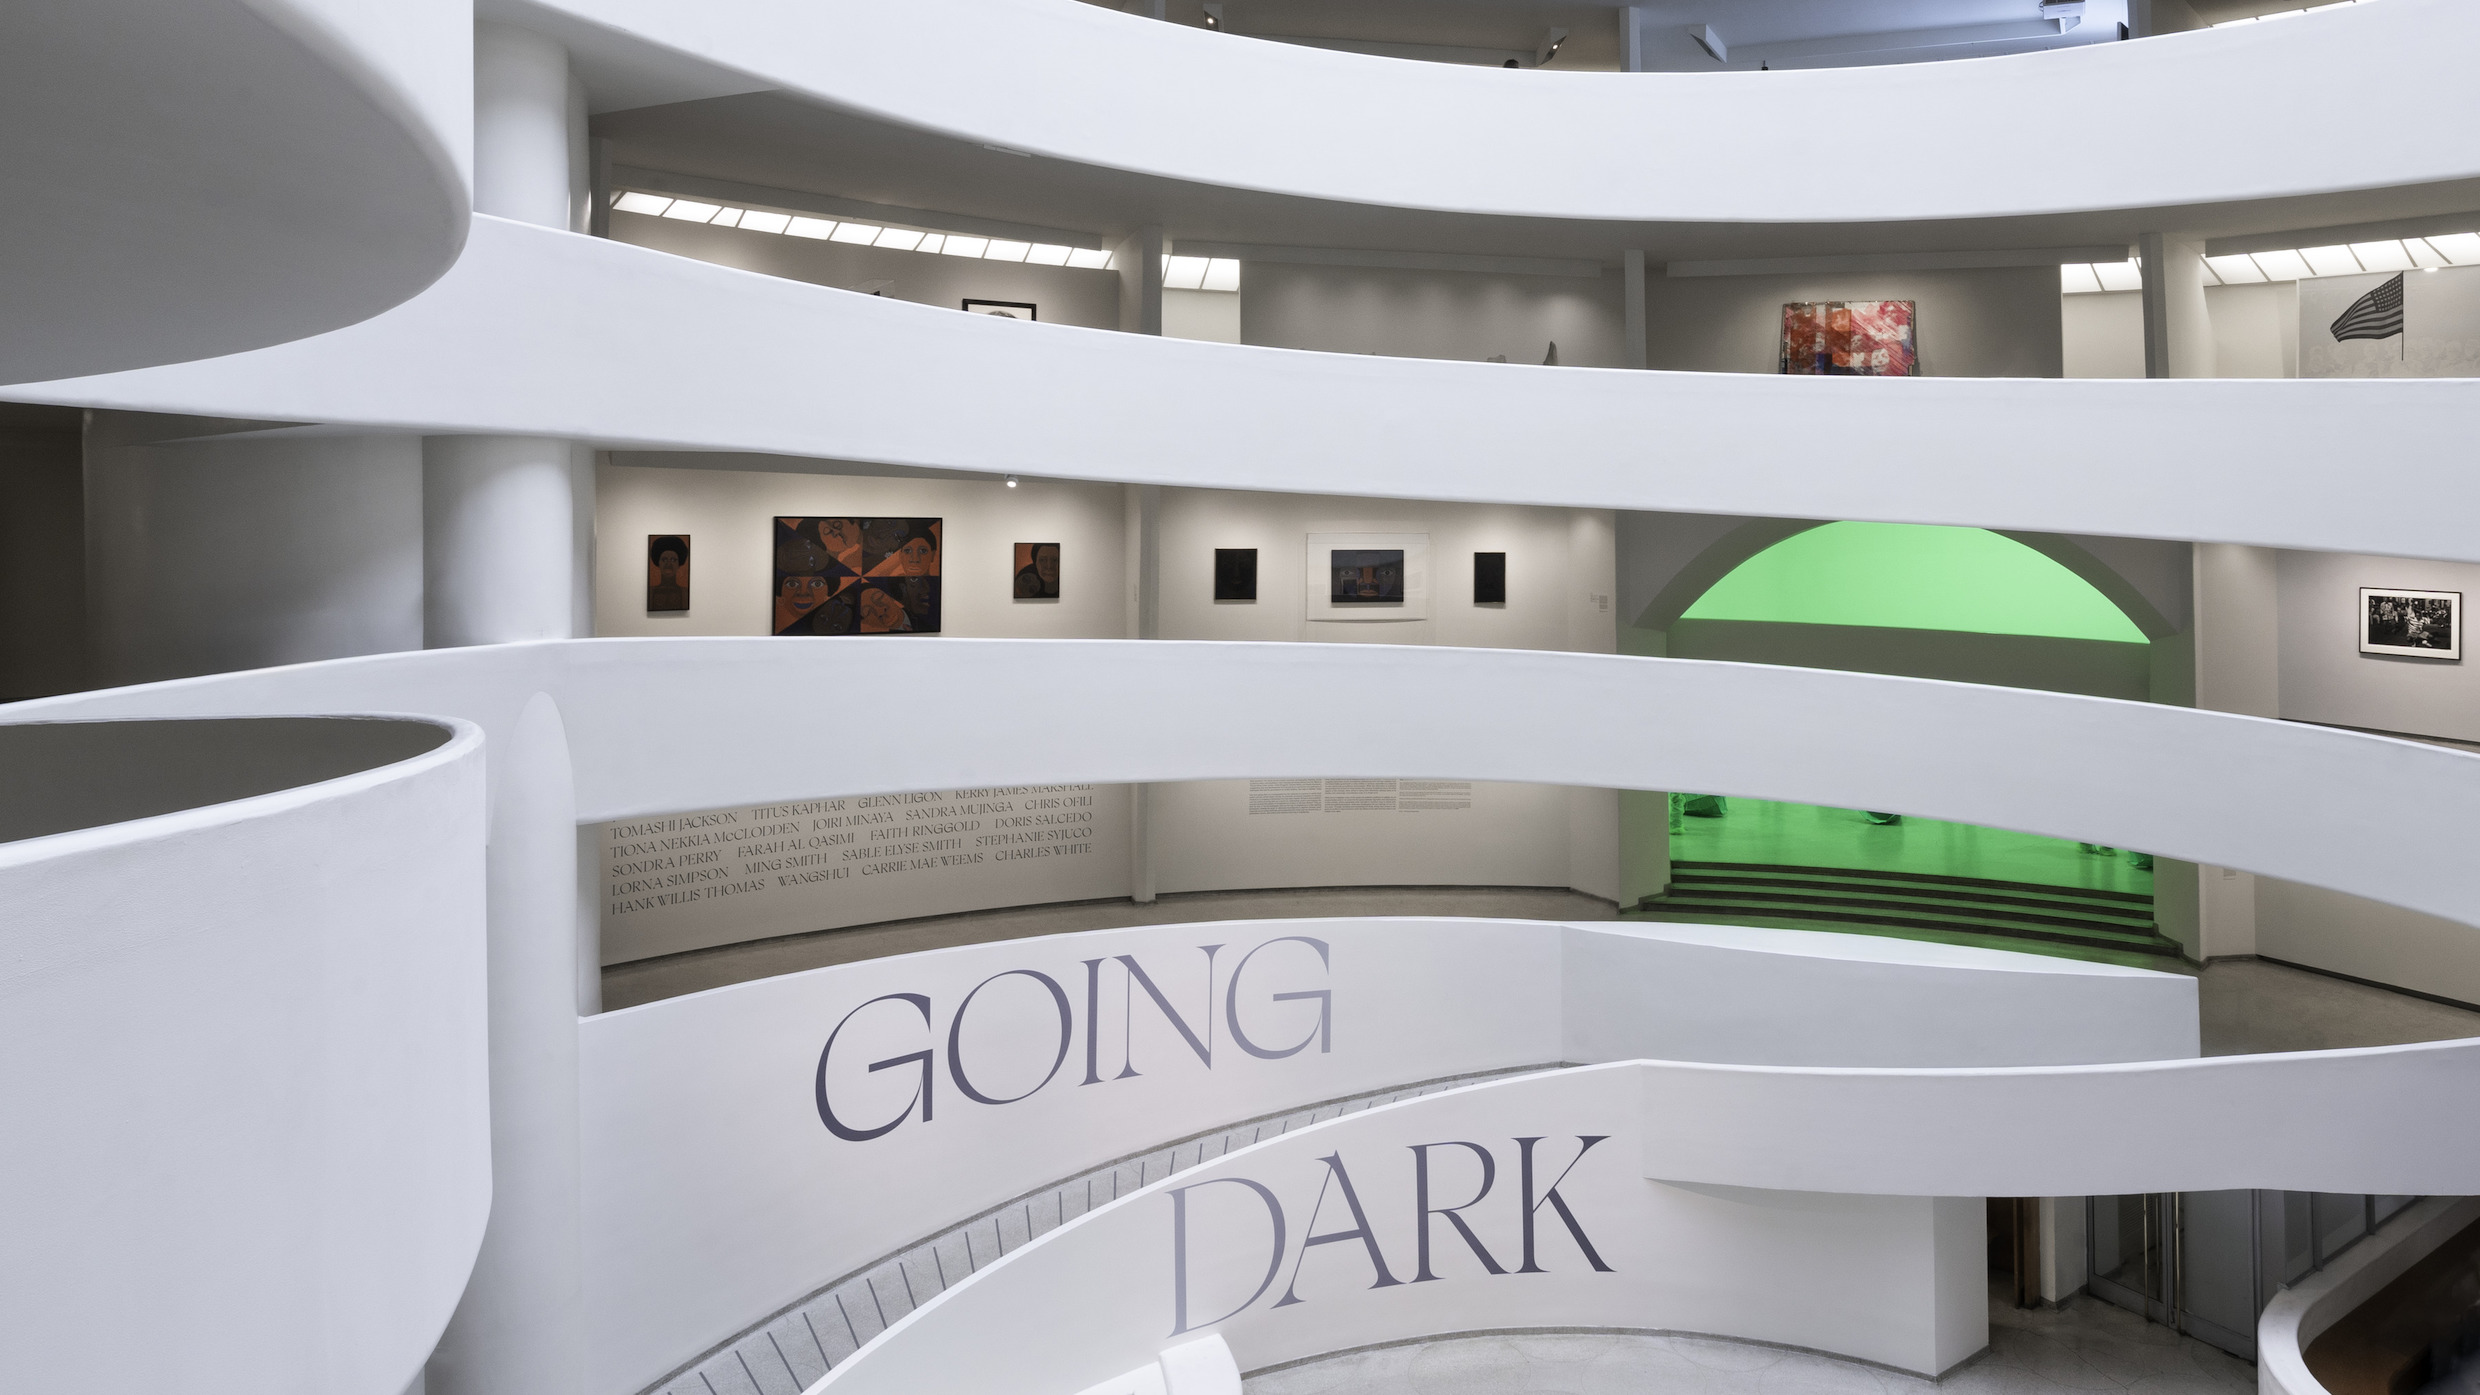 Going Dark: The Contemporary Figure at the Edge of Visibility